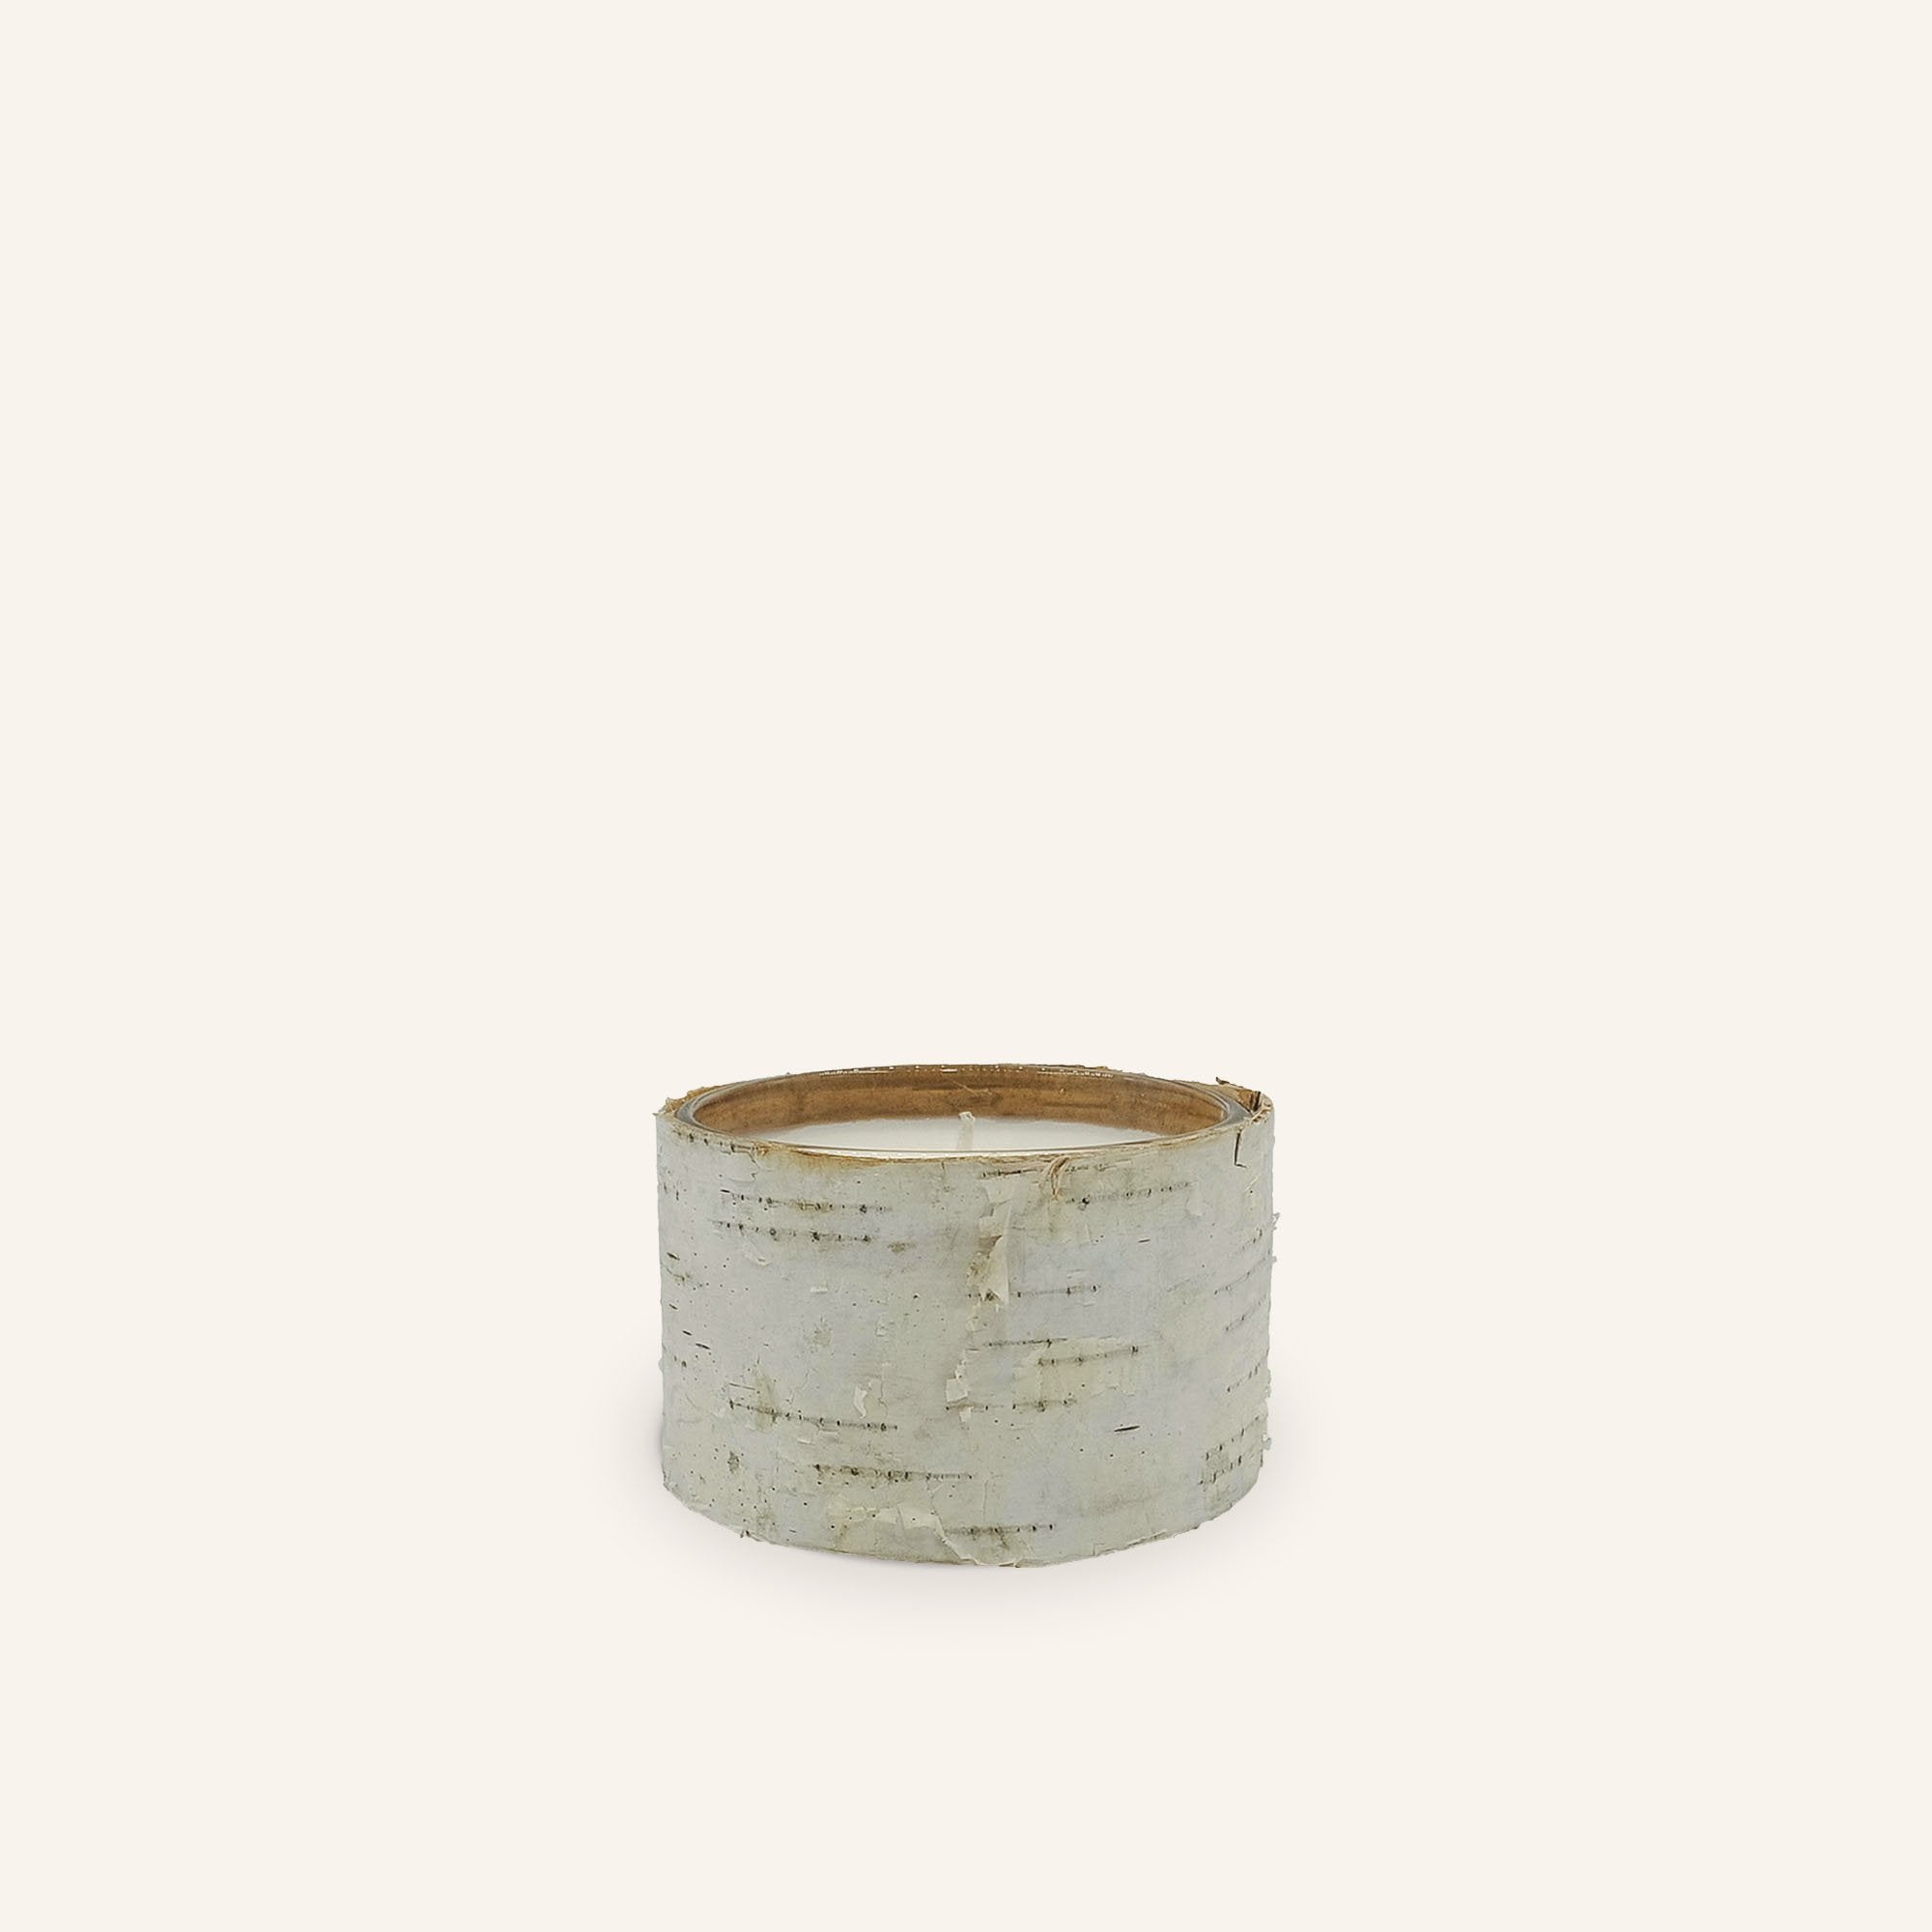 The Birch Filled candle is a white wax candle with birch bark around the outside. This candle has a tag tied with rope that reads, "Red Leaf Home. Birch Bark. Hand crafted in Thailand."